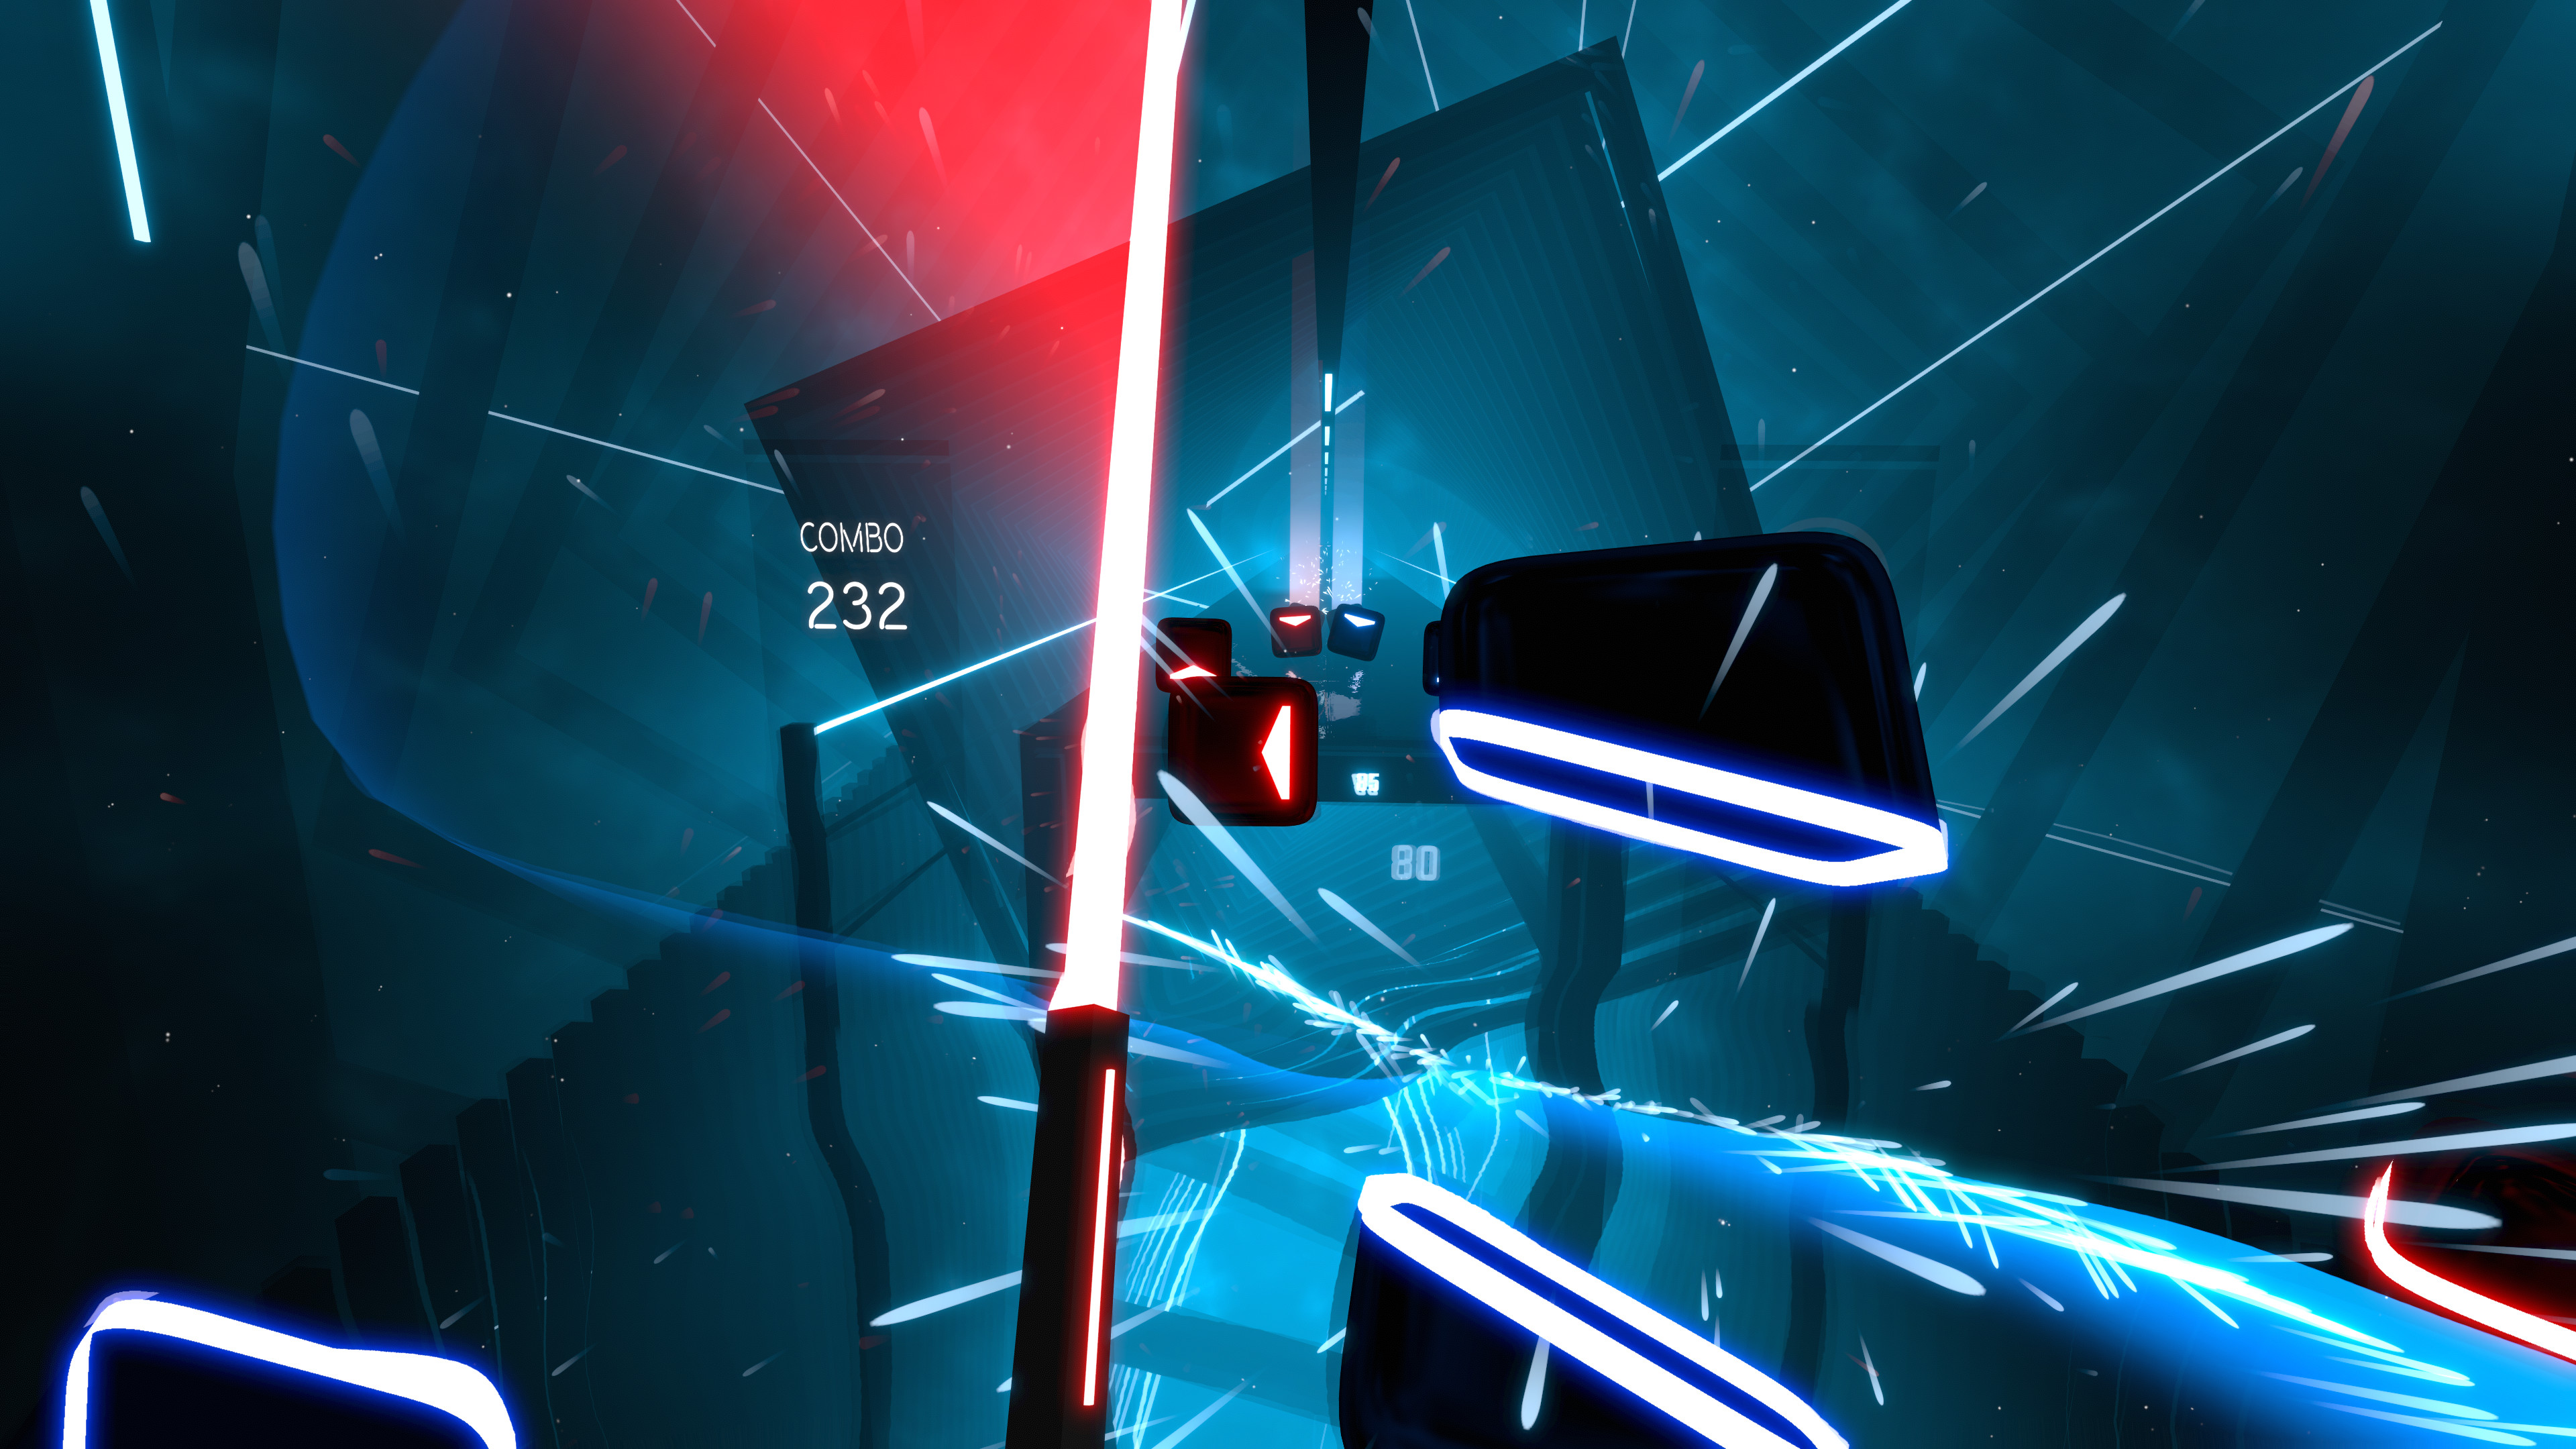 A Beat Saber player cuts through the blue block with a flower